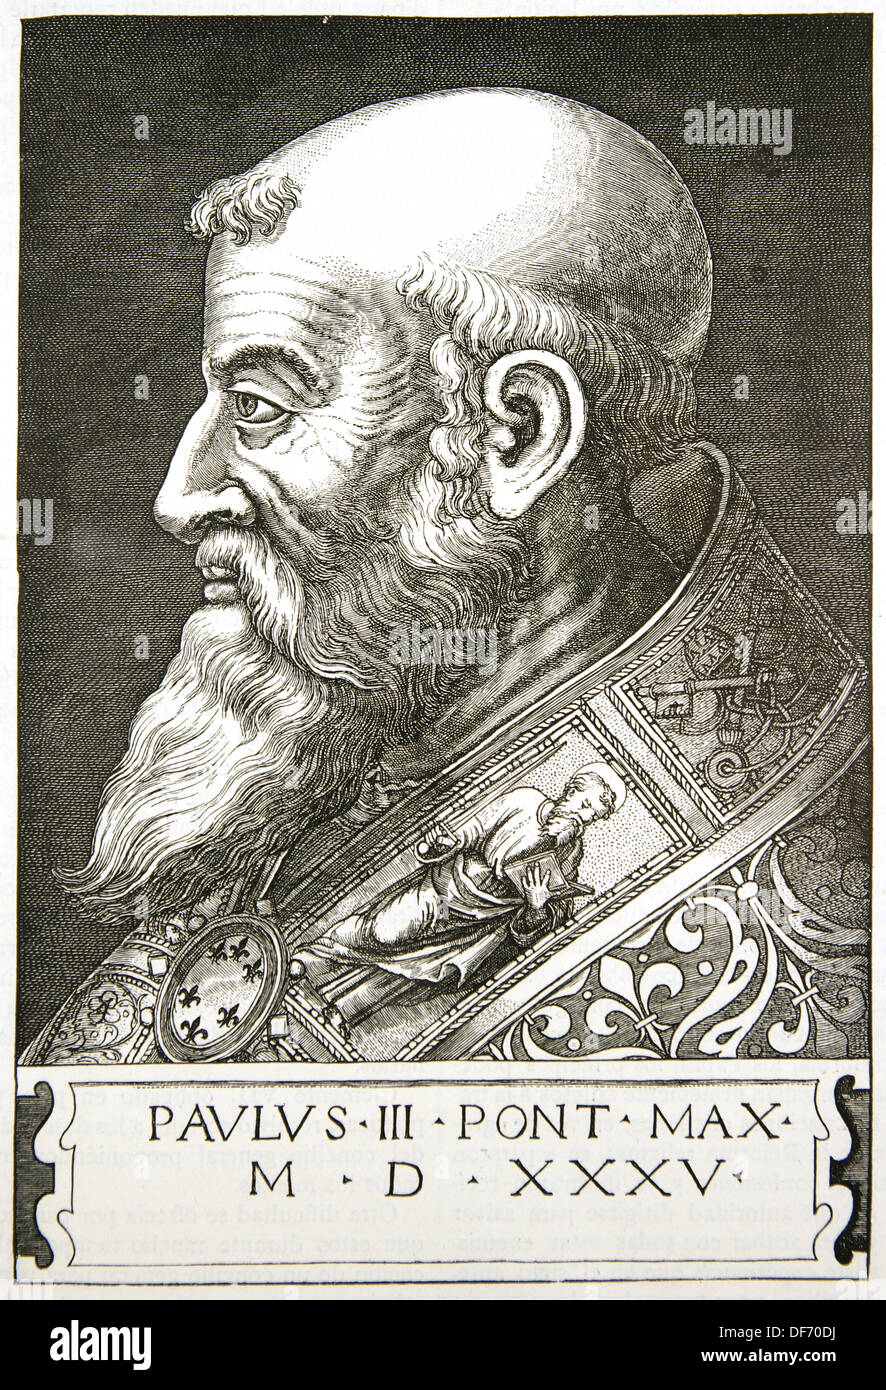 Paul IV (1476 –1559), Gian Pietro Carafa, was Pope from 23 May 1555 until his death. Engraving. Stock Photo